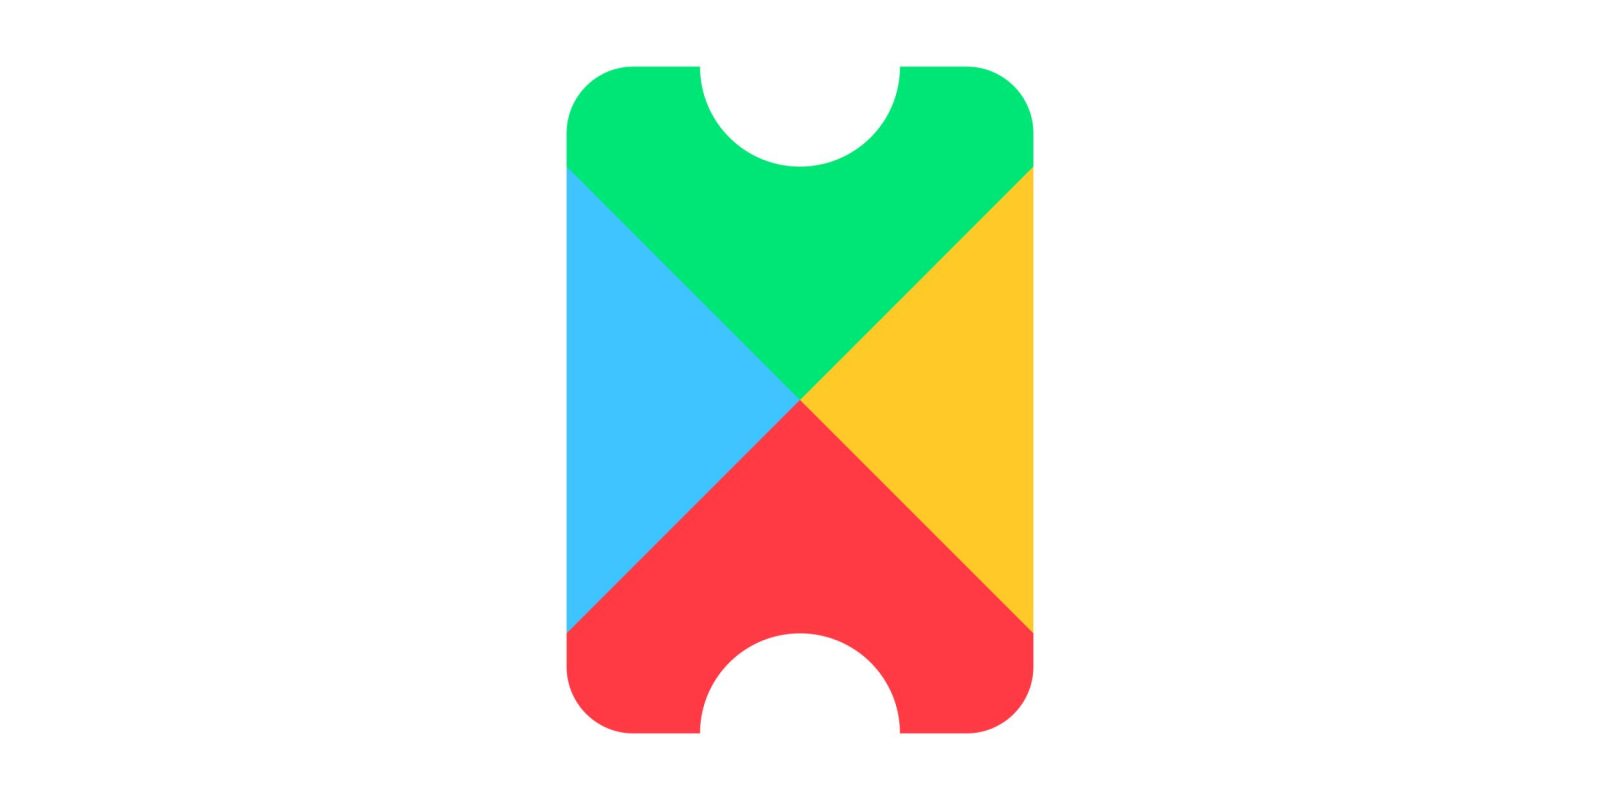 Google to Launch Google Play Pass' later this week that Offers